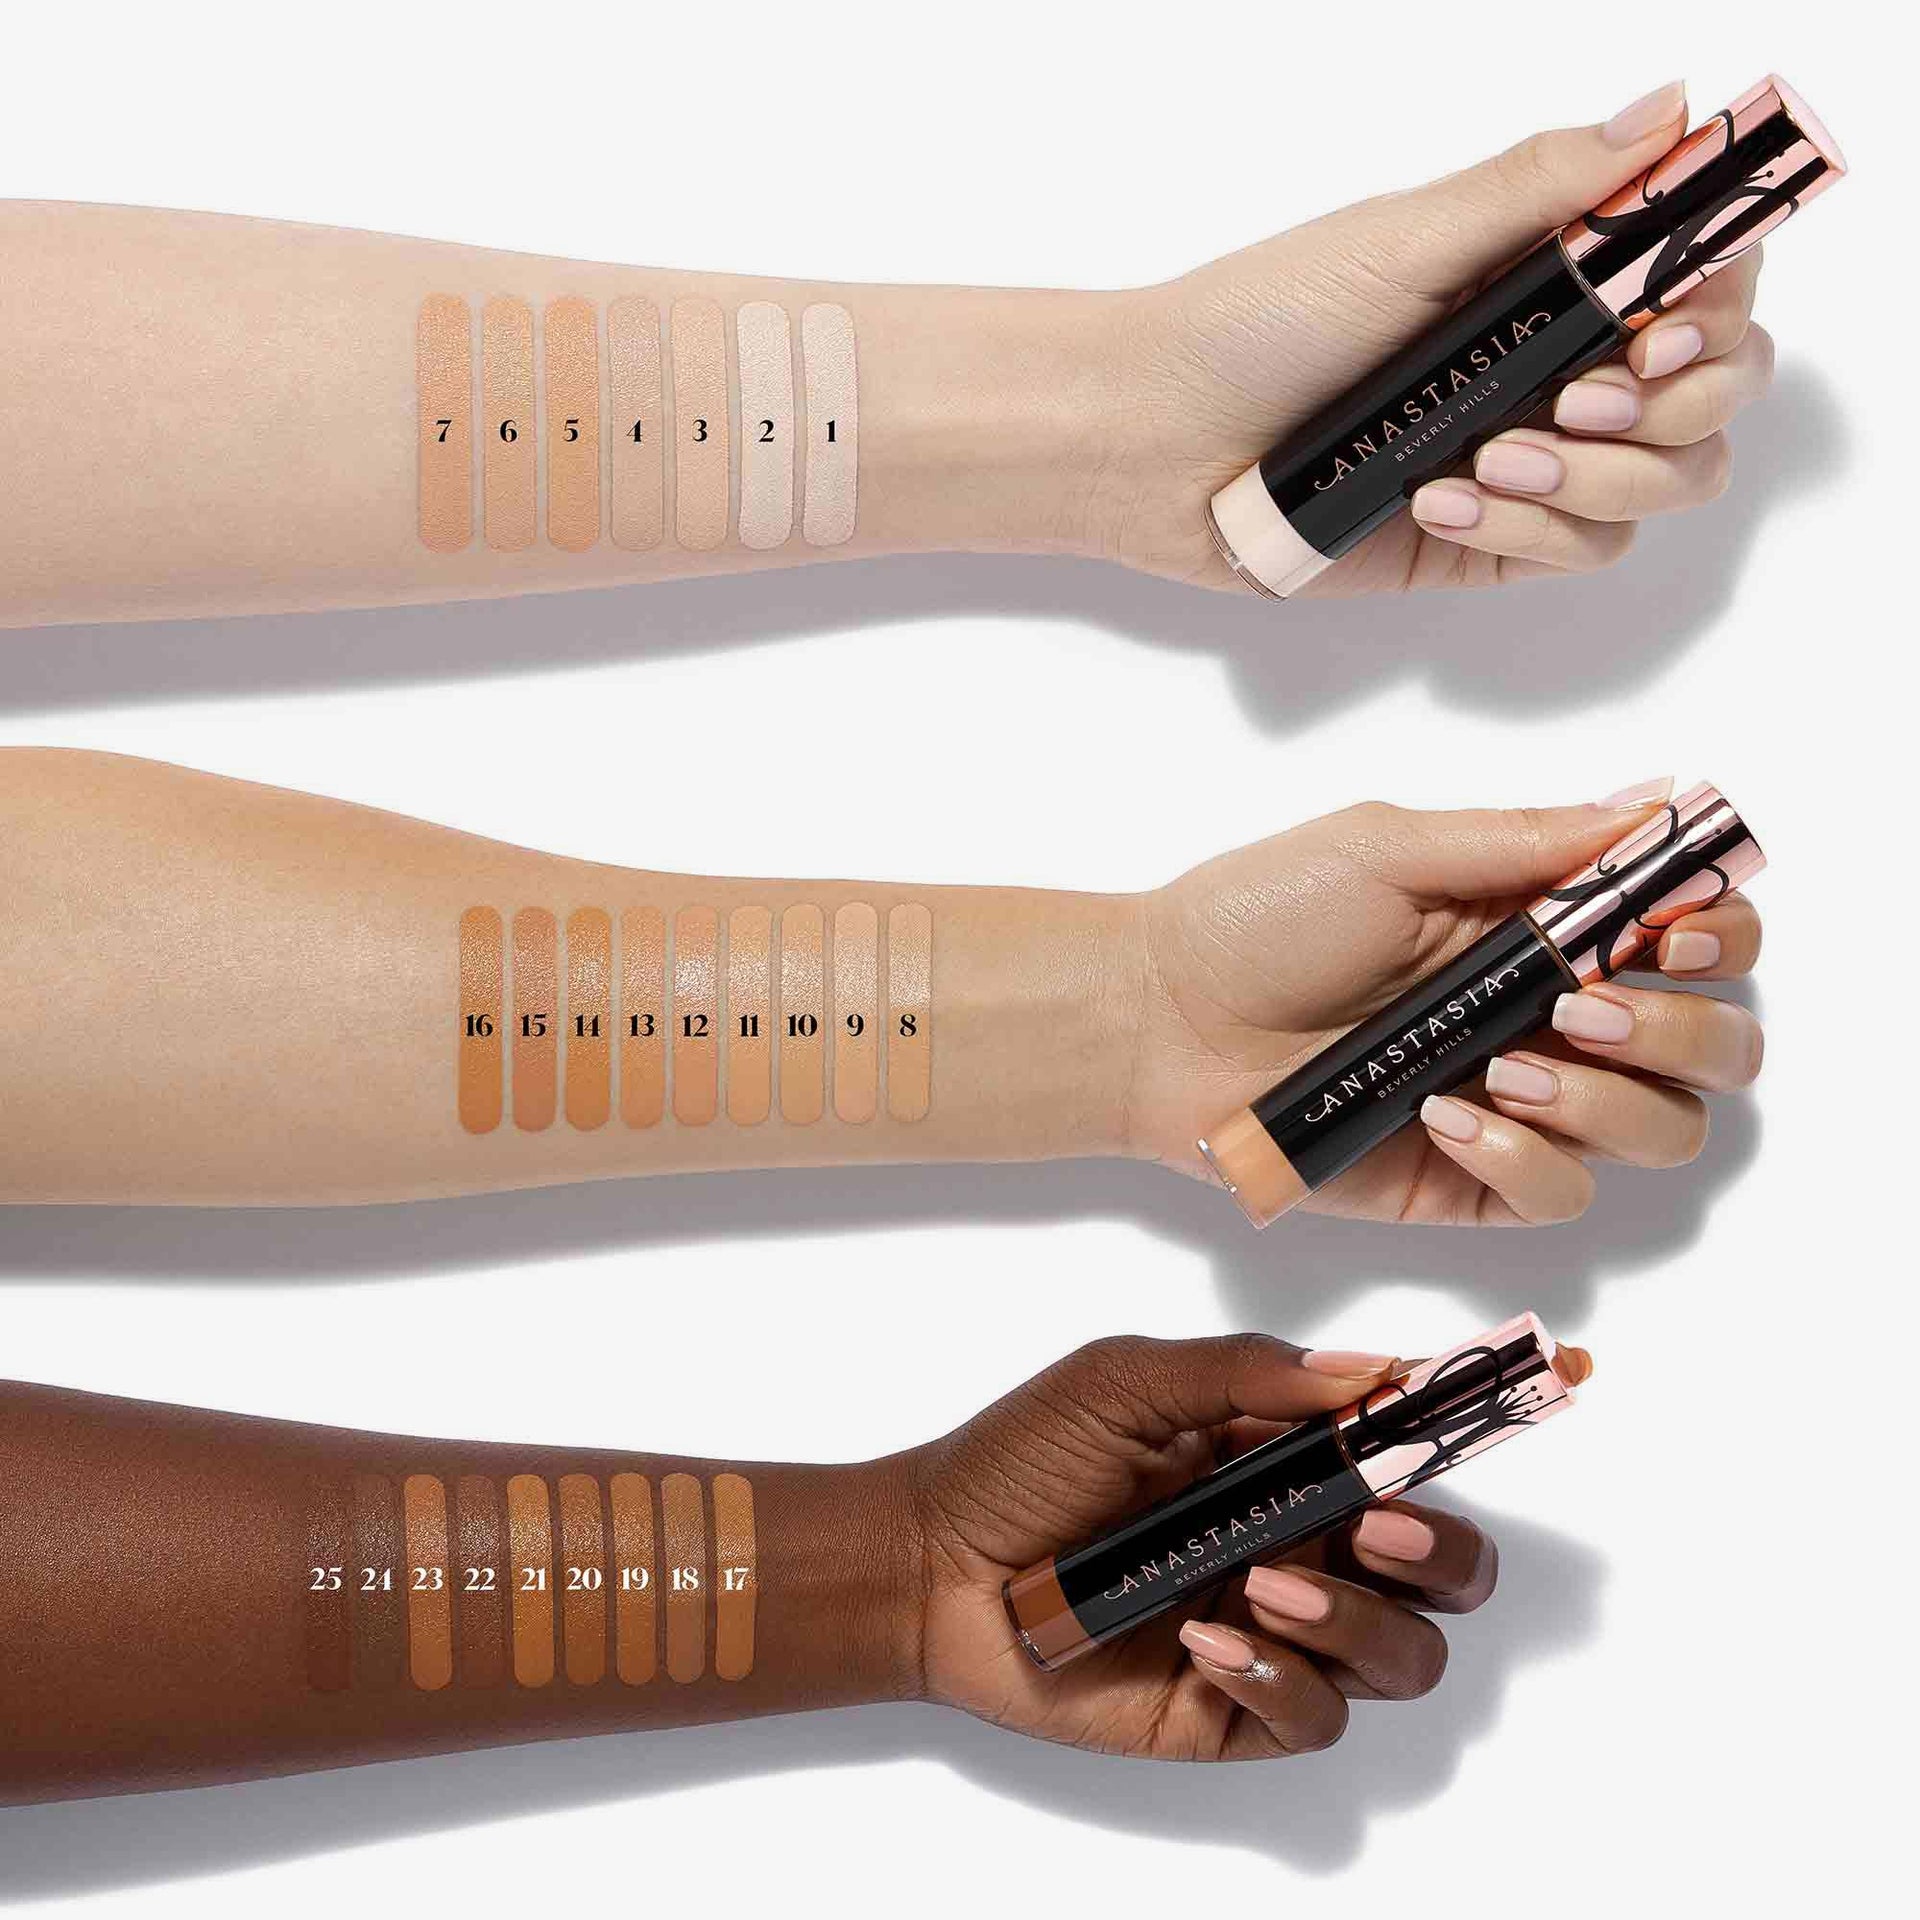 Magic Touch Concealer Arm Swatches 